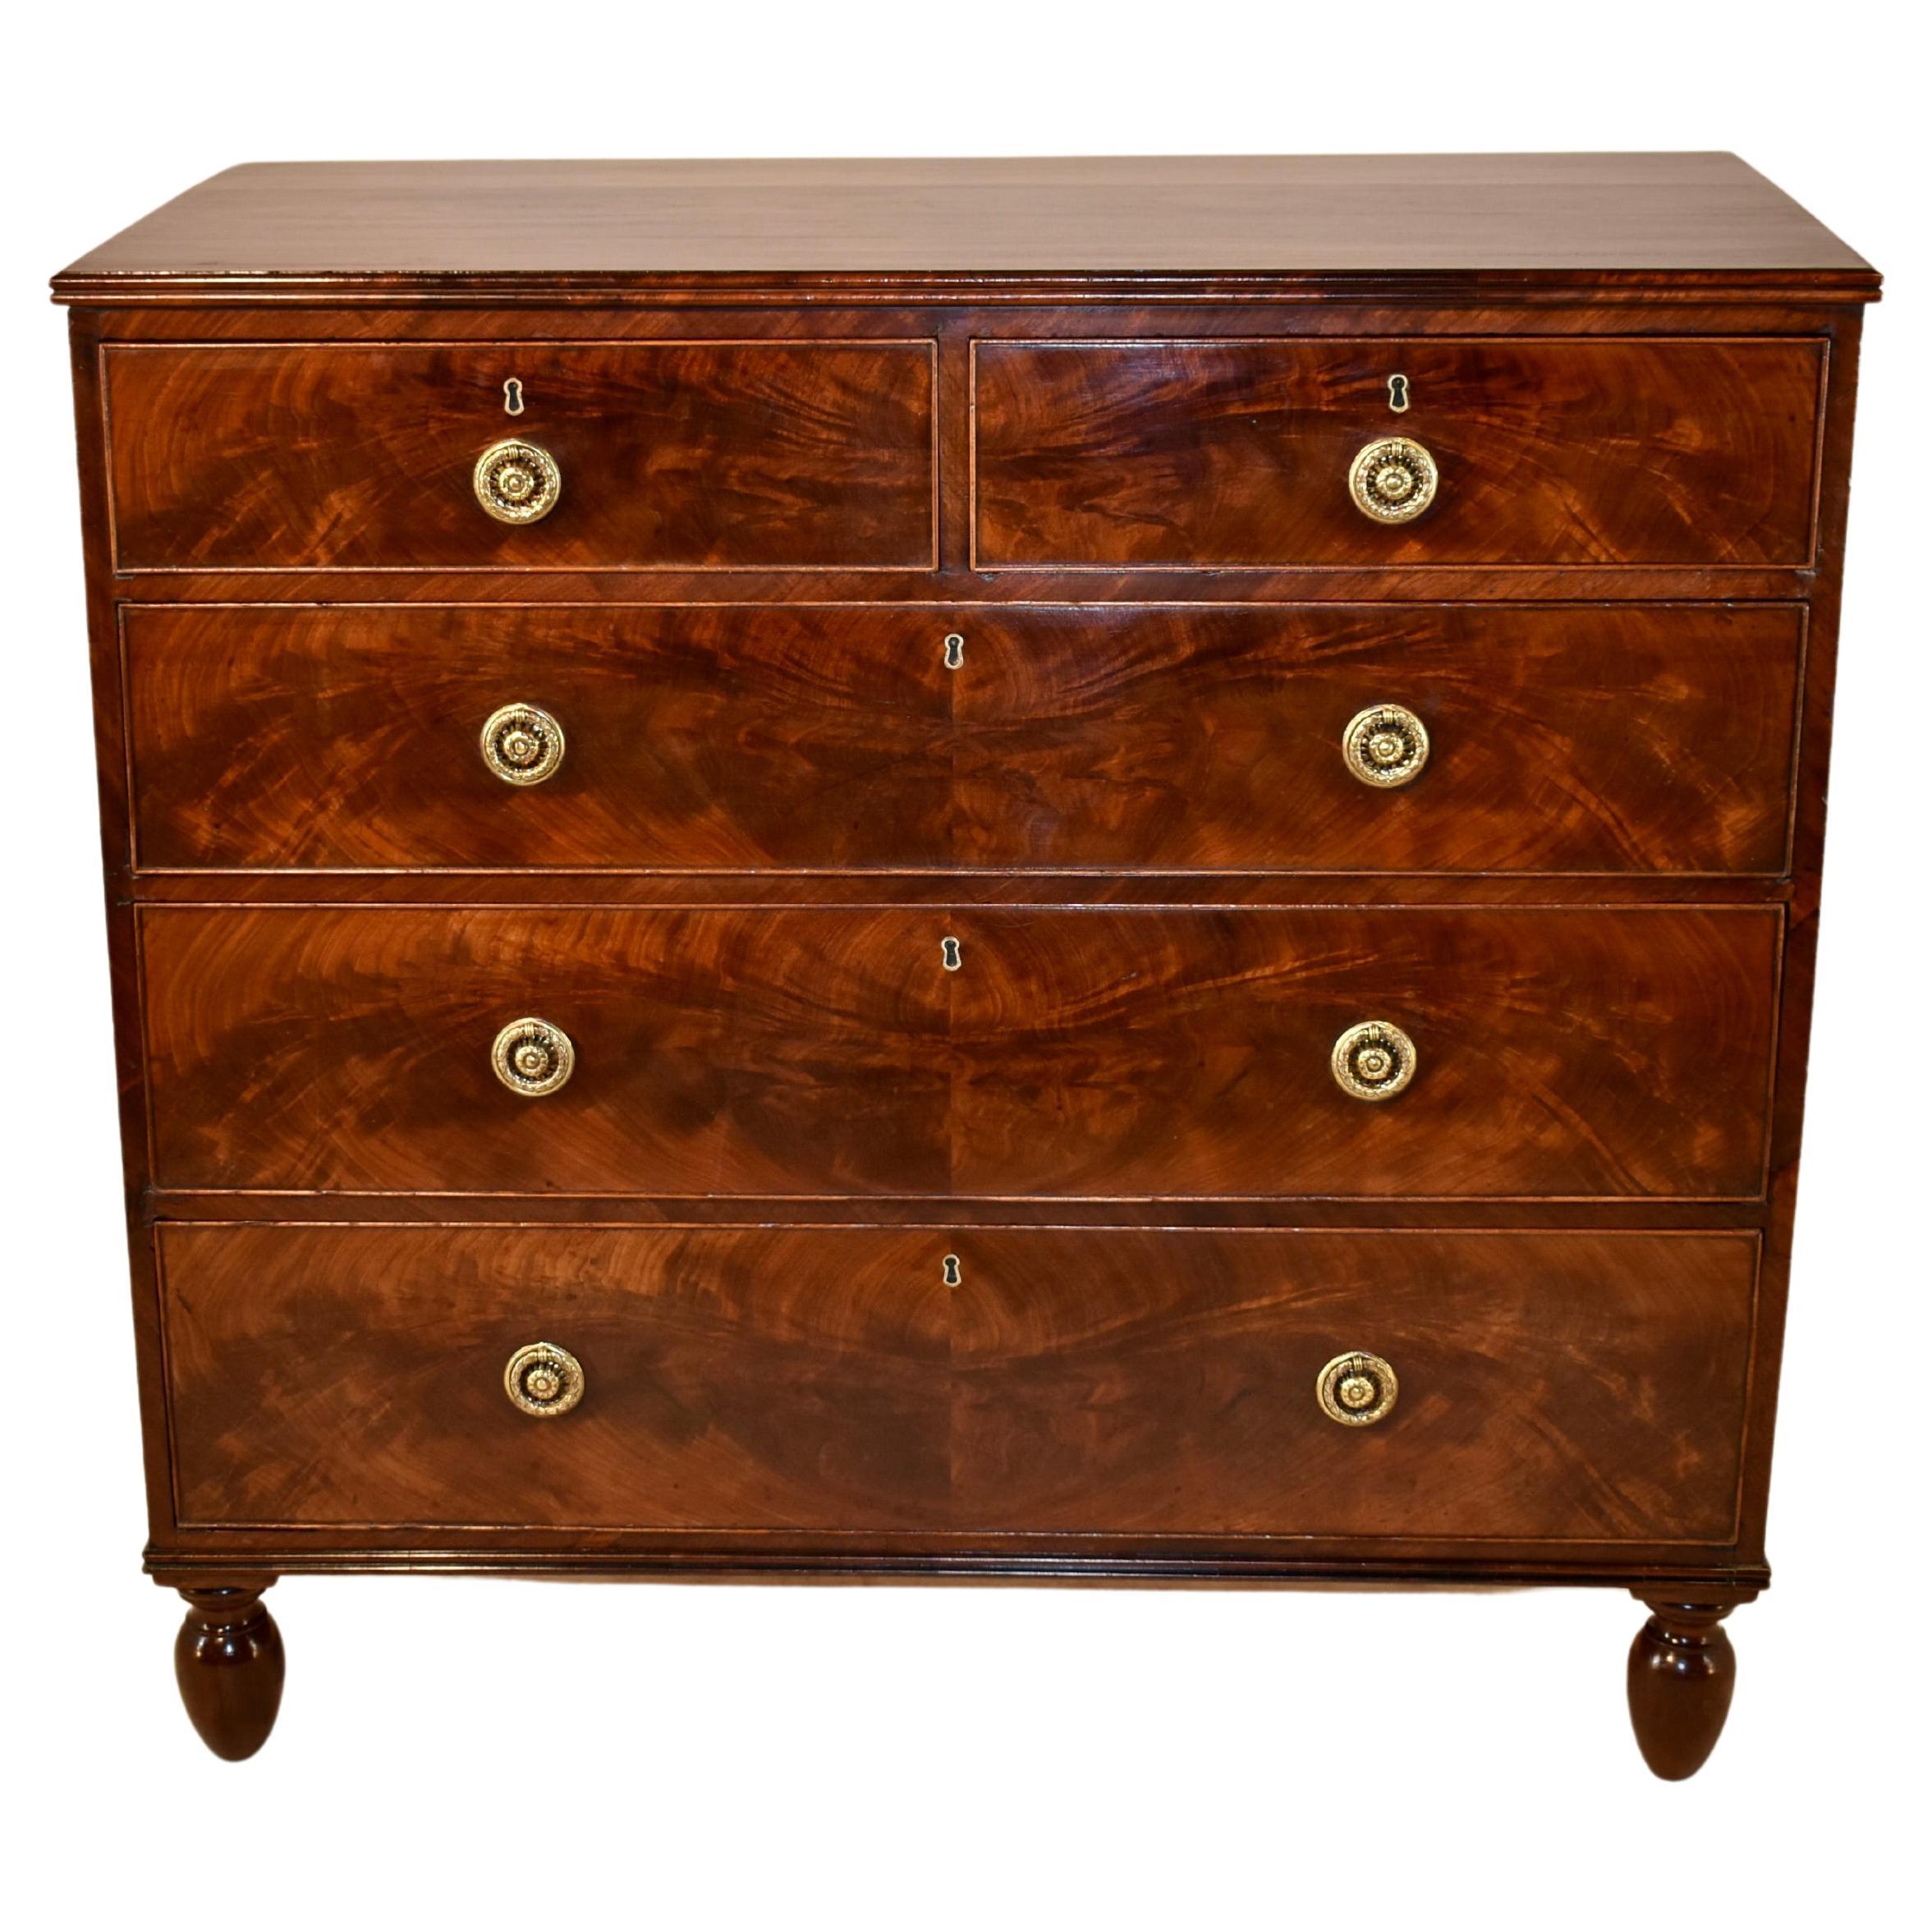 Early 19th Century English Mahogany Chest of Drawers For Sale